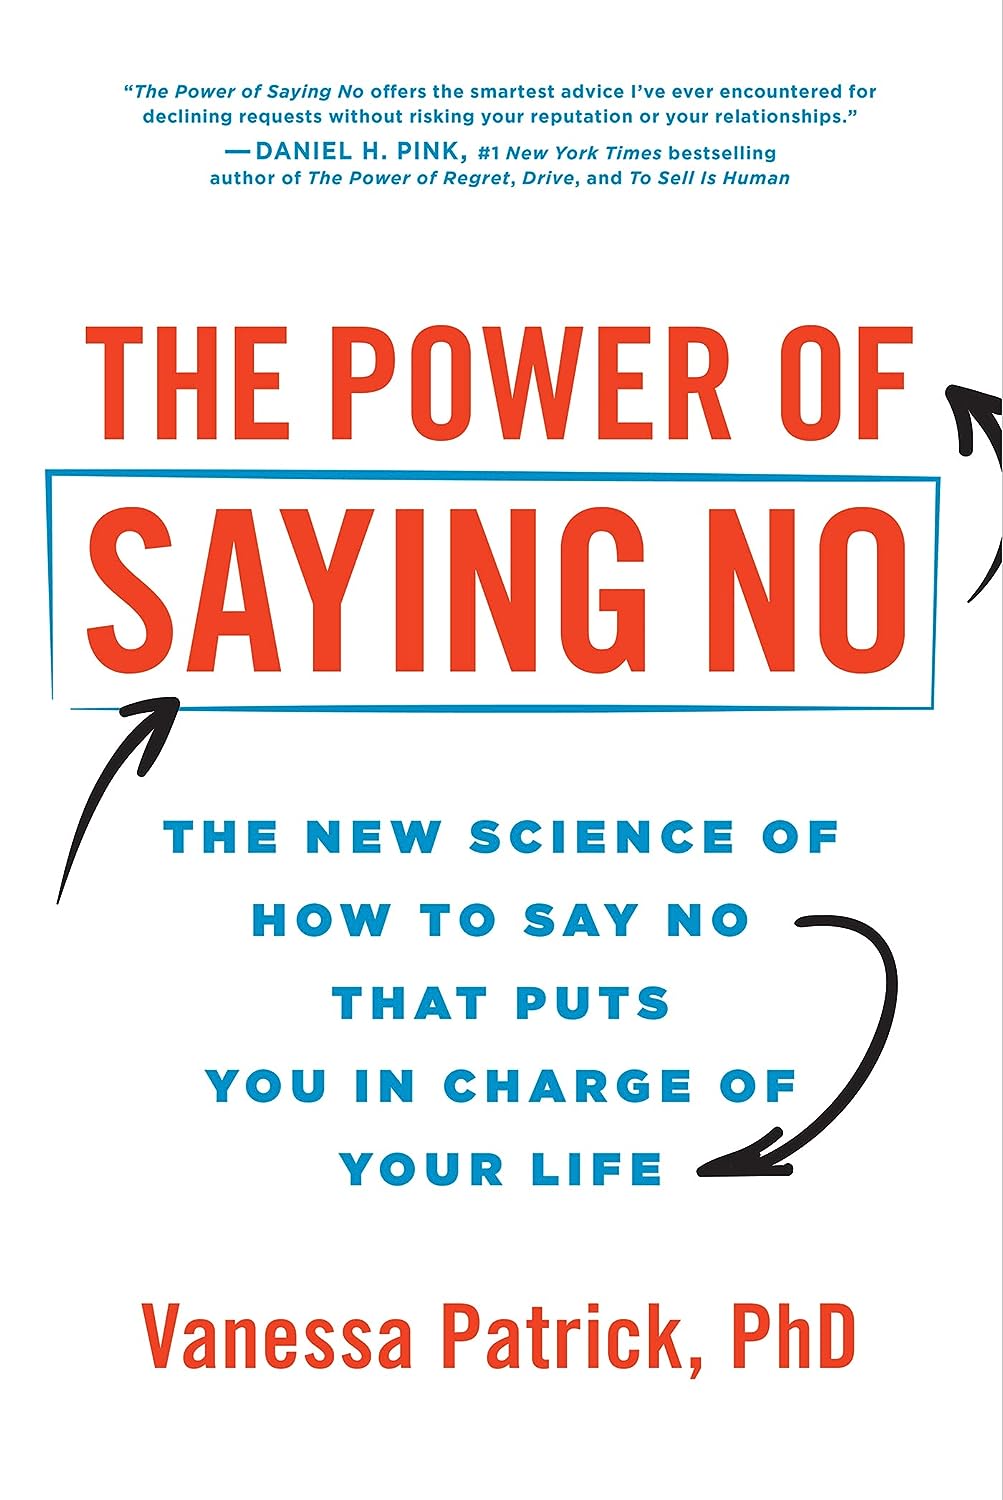 Introduction to the Power of No